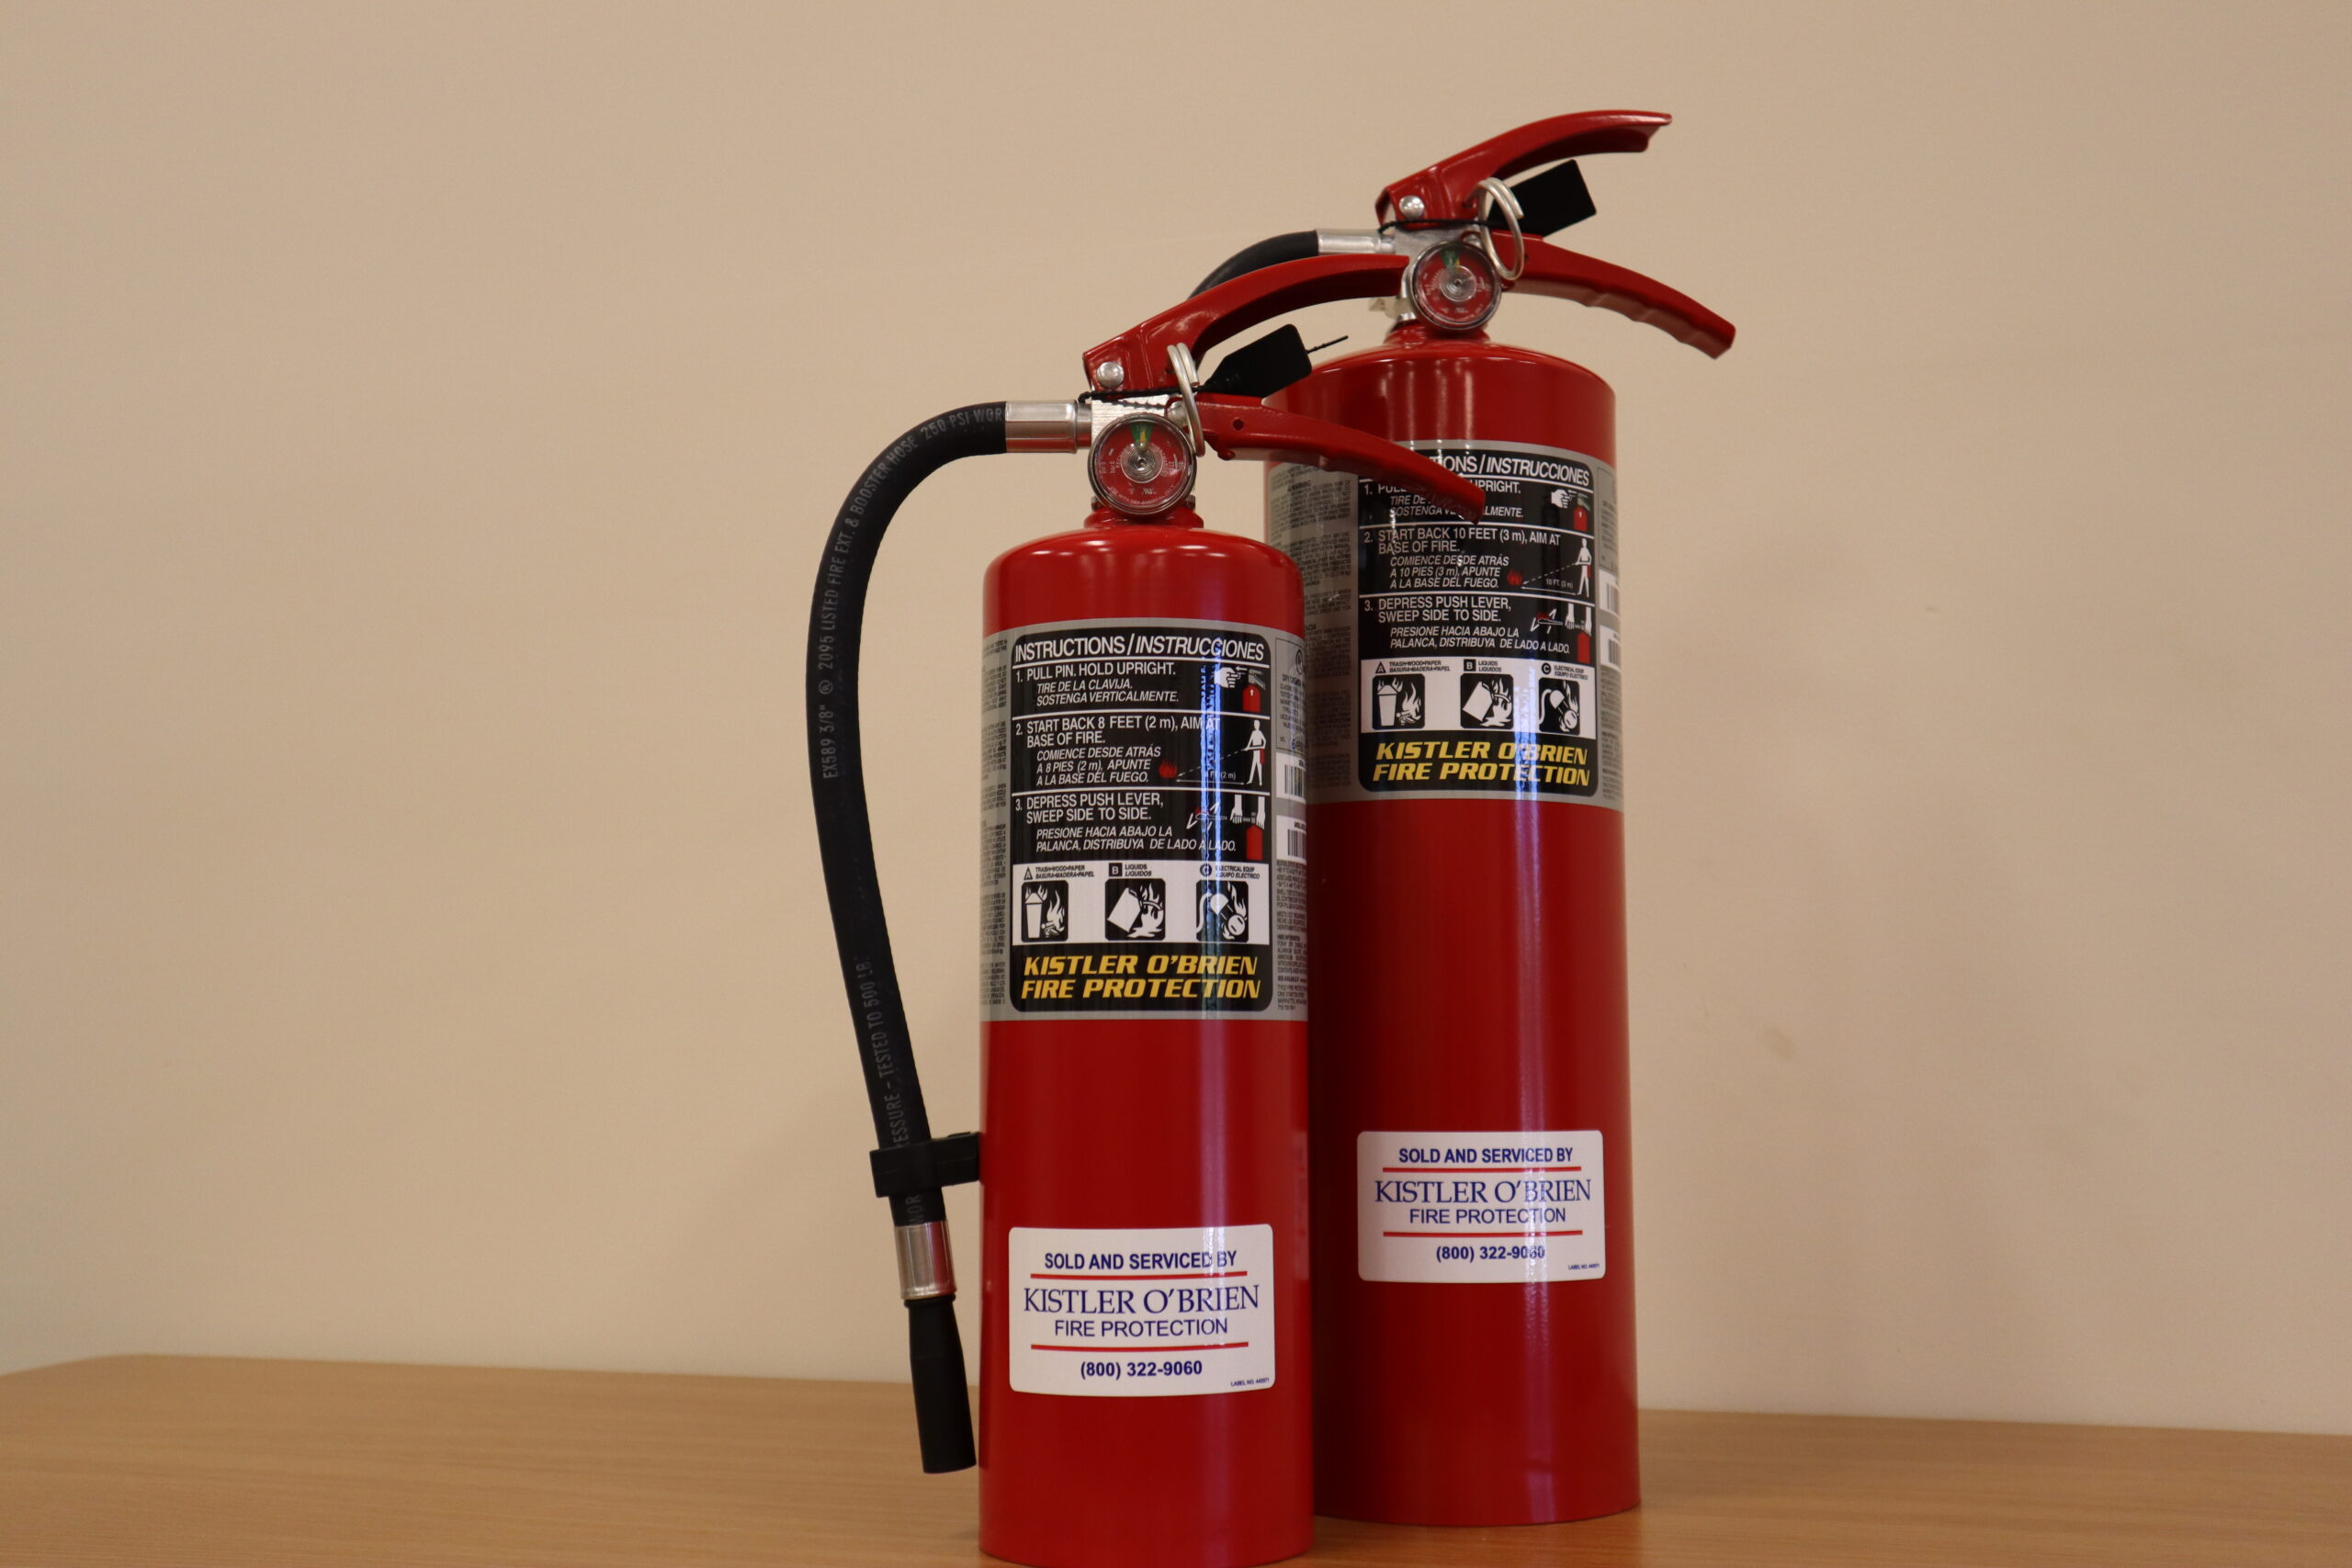 Fire Extinguishers 101 Safety Tips You Need To Know Kistler Obrien Fire Protection 